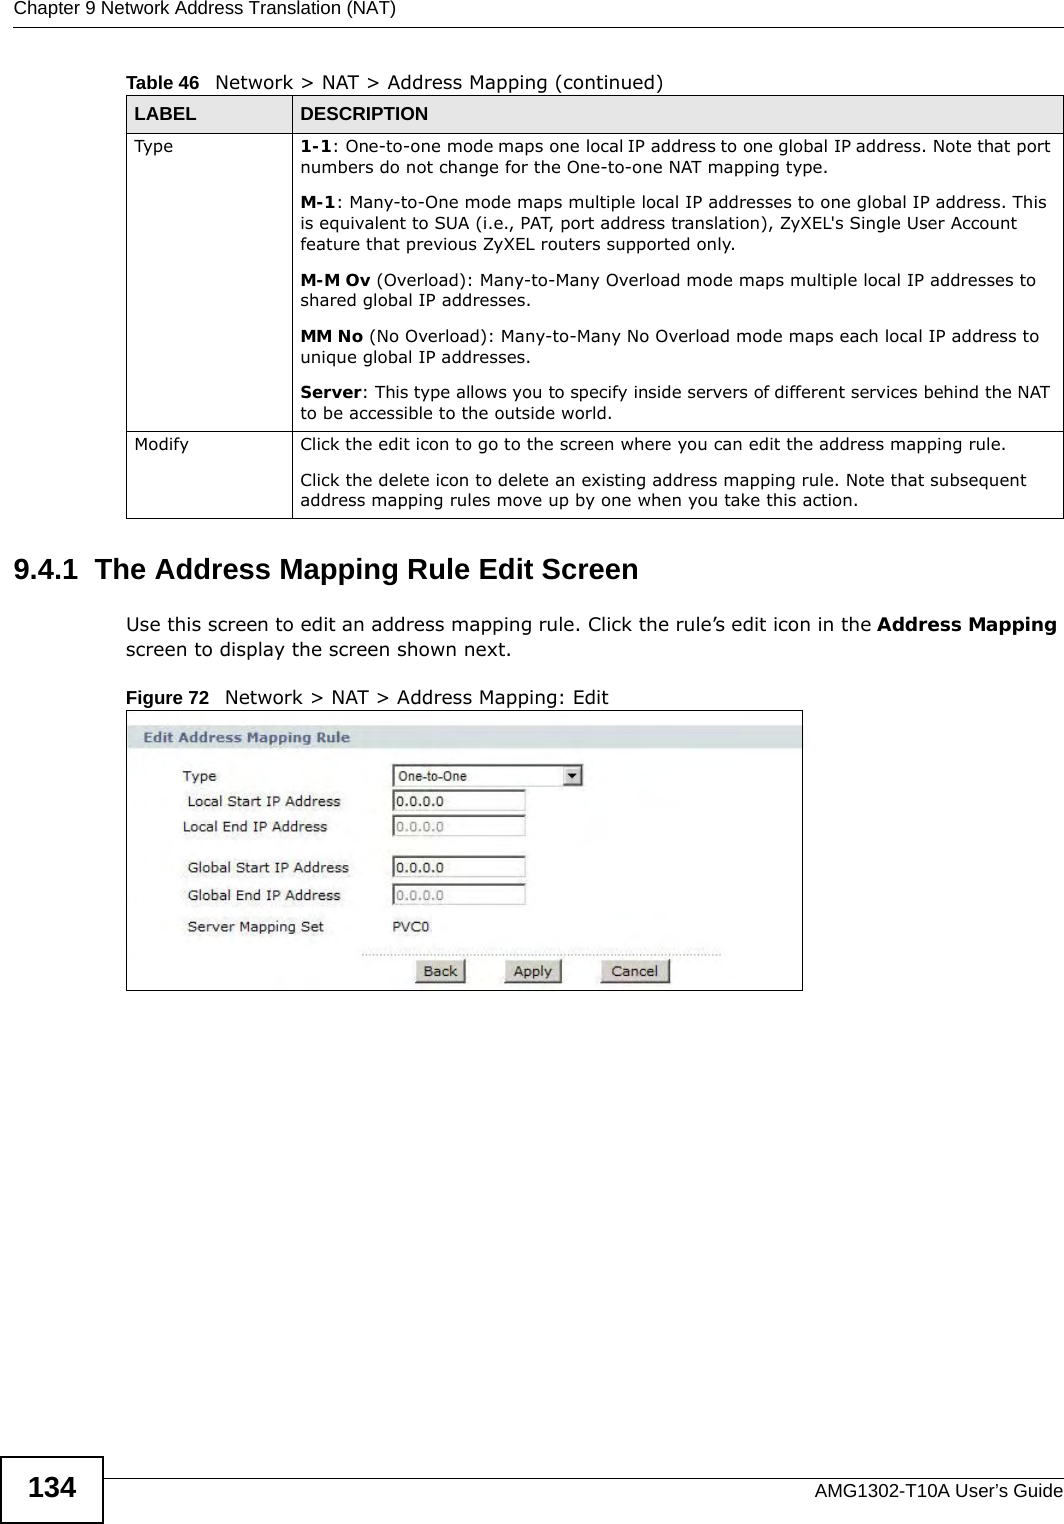 Chapter 9 Network Address Translation (NAT)AMG1302-T10A User’s Guide1349.4.1  The Address Mapping Rule Edit ScreenUse this screen to edit an address mapping rule. Click the rule’s edit icon in the Address Mapping screen to display the screen shown next.Figure 72   Network &gt; NAT &gt; Address Mapping: Edit Type 1-1: One-to-one mode maps one local IP address to one global IP address. Note that port numbers do not change for the One-to-one NAT mapping type. M-1: Many-to-One mode maps multiple local IP addresses to one global IP address. This is equivalent to SUA (i.e., PAT, port address translation), ZyXEL&apos;s Single User Account feature that previous ZyXEL routers supported only. M-M Ov (Overload): Many-to-Many Overload mode maps multiple local IP addresses to shared global IP addresses. MM No (No Overload): Many-to-Many No Overload mode maps each local IP address to unique global IP addresses. Server: This type allows you to specify inside servers of different services behind the NAT to be accessible to the outside world. Modify Click the edit icon to go to the screen where you can edit the address mapping rule.Click the delete icon to delete an existing address mapping rule. Note that subsequent address mapping rules move up by one when you take this action.Table 46   Network &gt; NAT &gt; Address Mapping (continued)LABEL DESCRIPTION